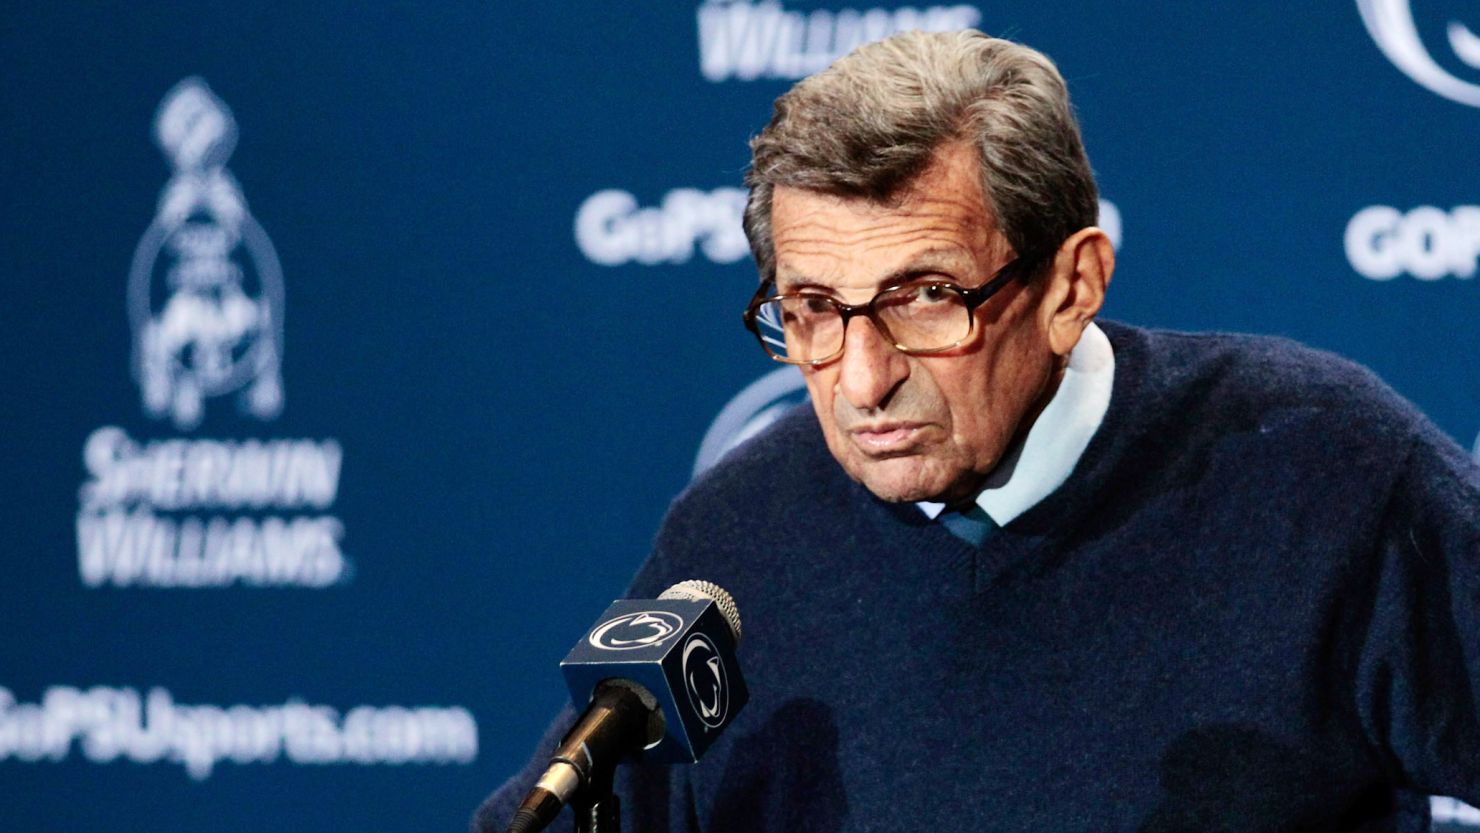 Penn State is paying Joe Paterno as if he retired at the end of the season.